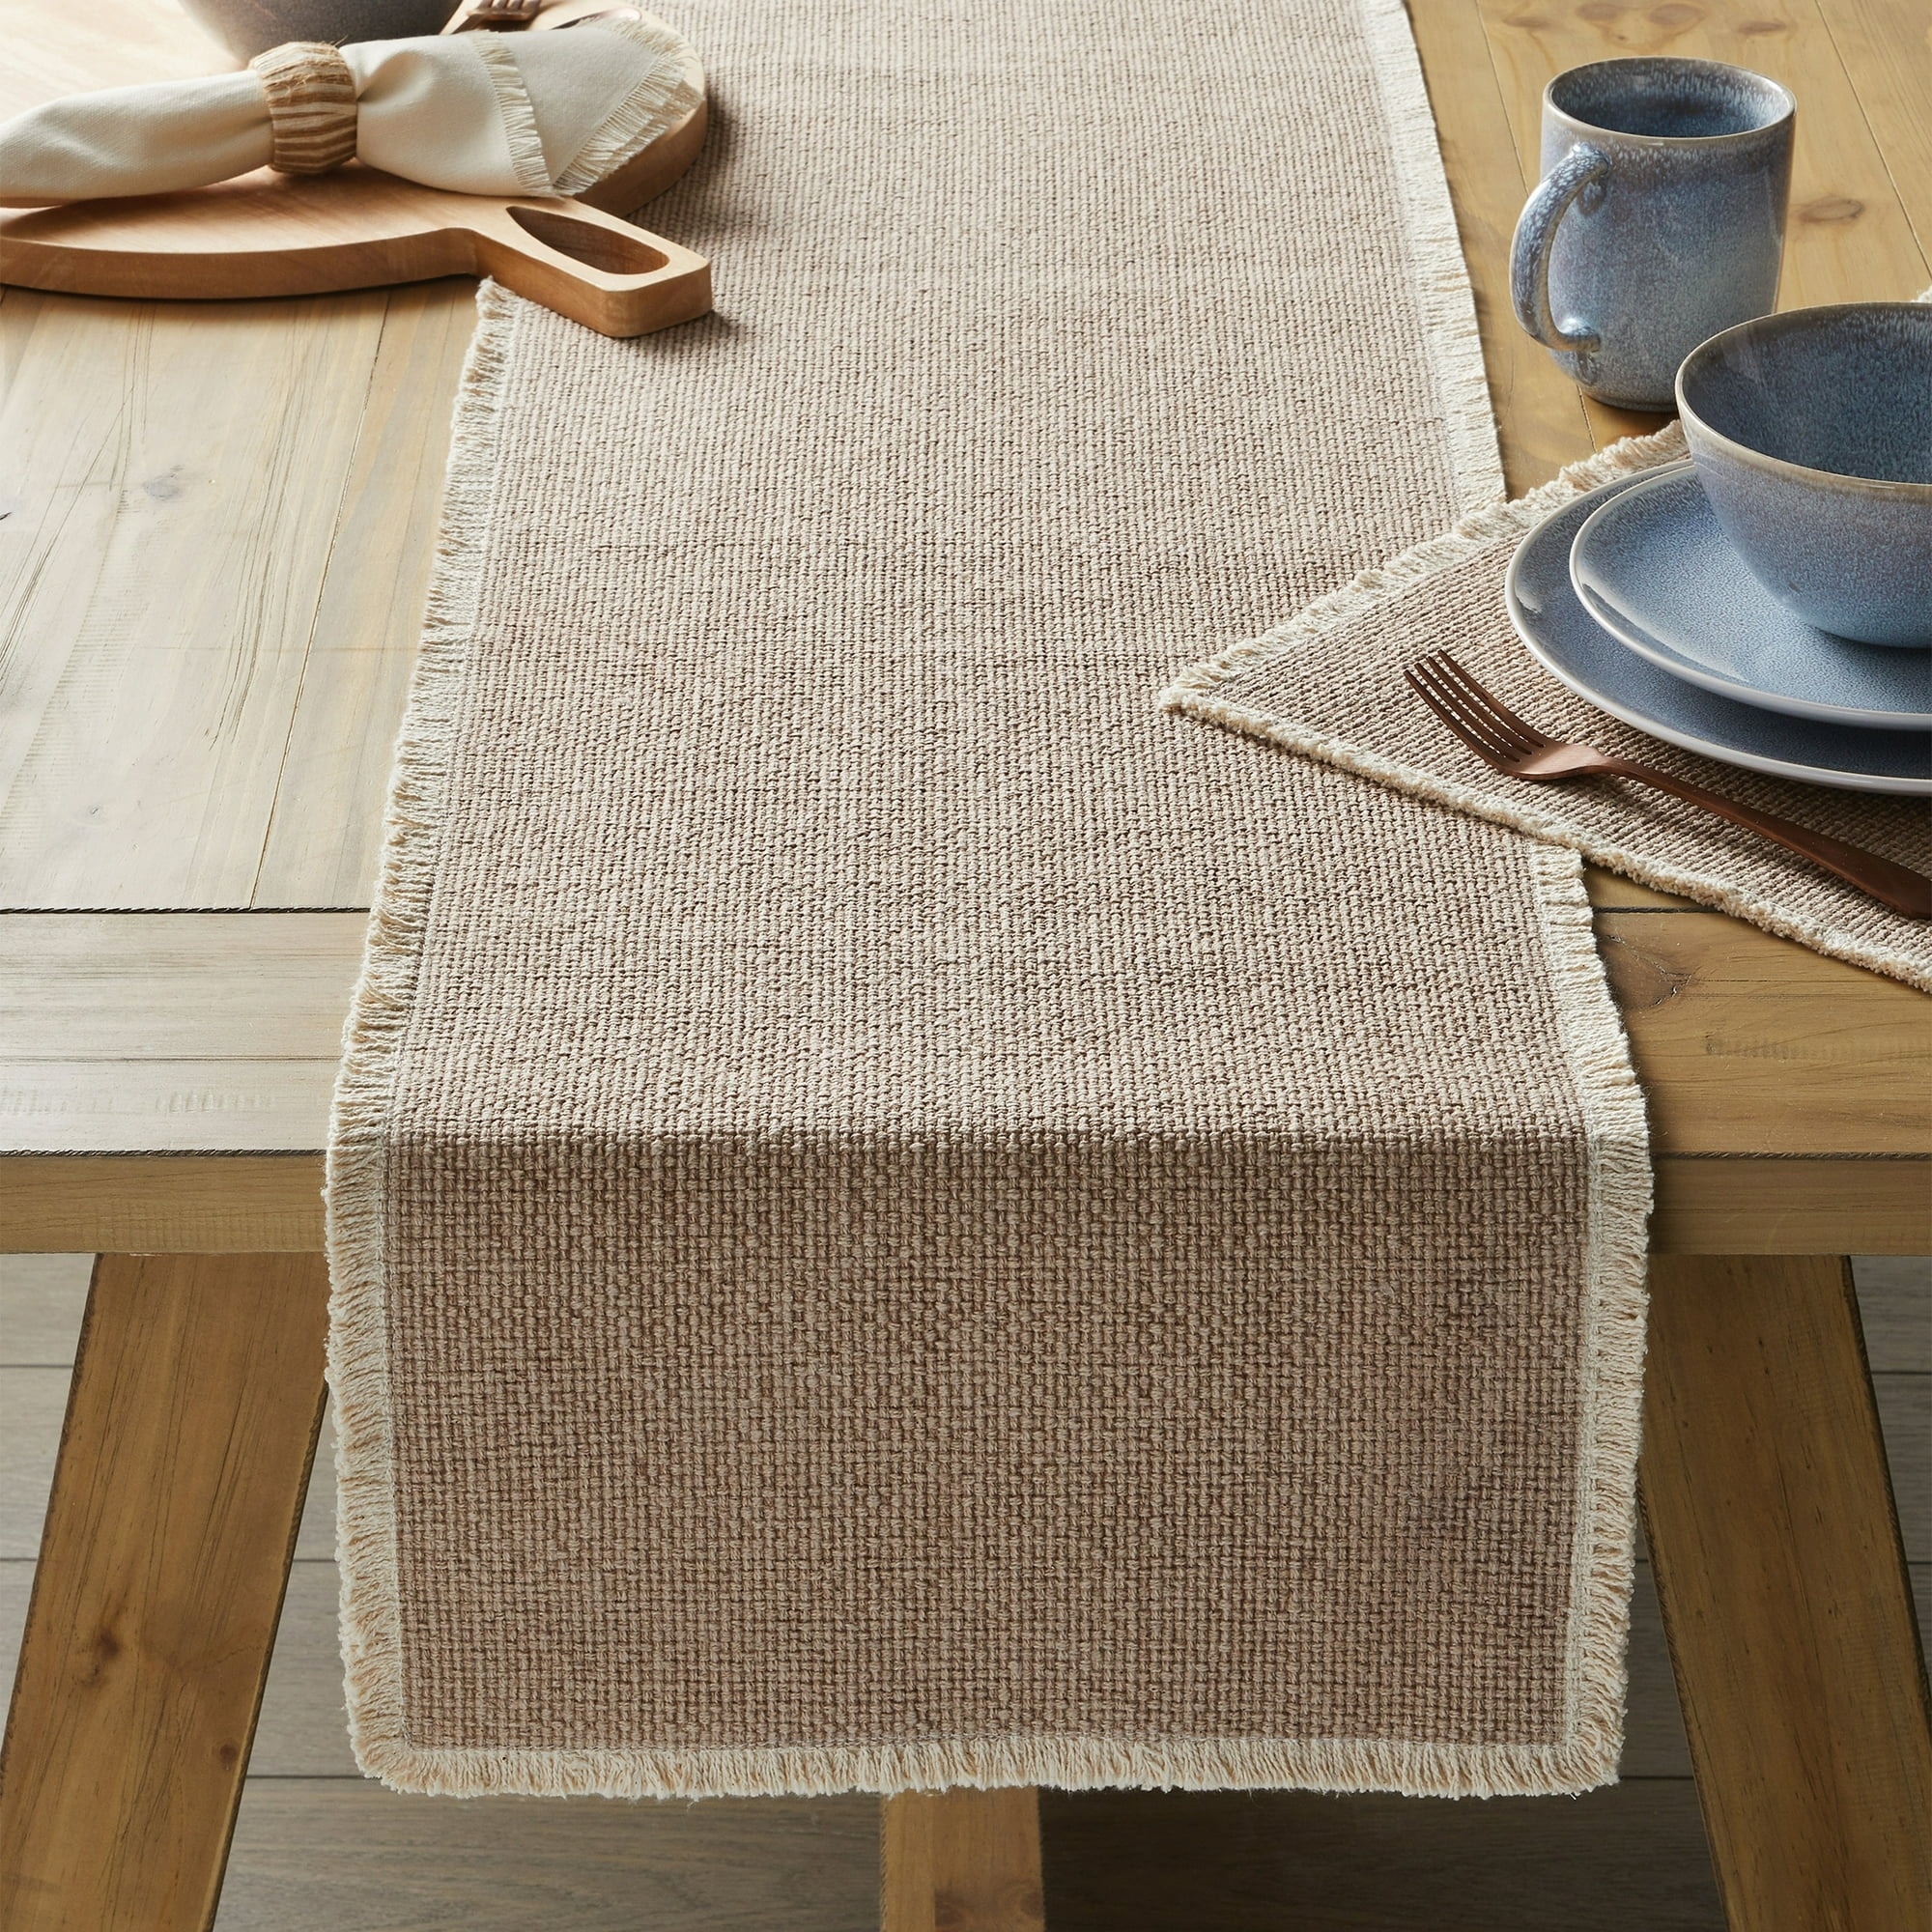 a woven table runner with fringe on a dining table